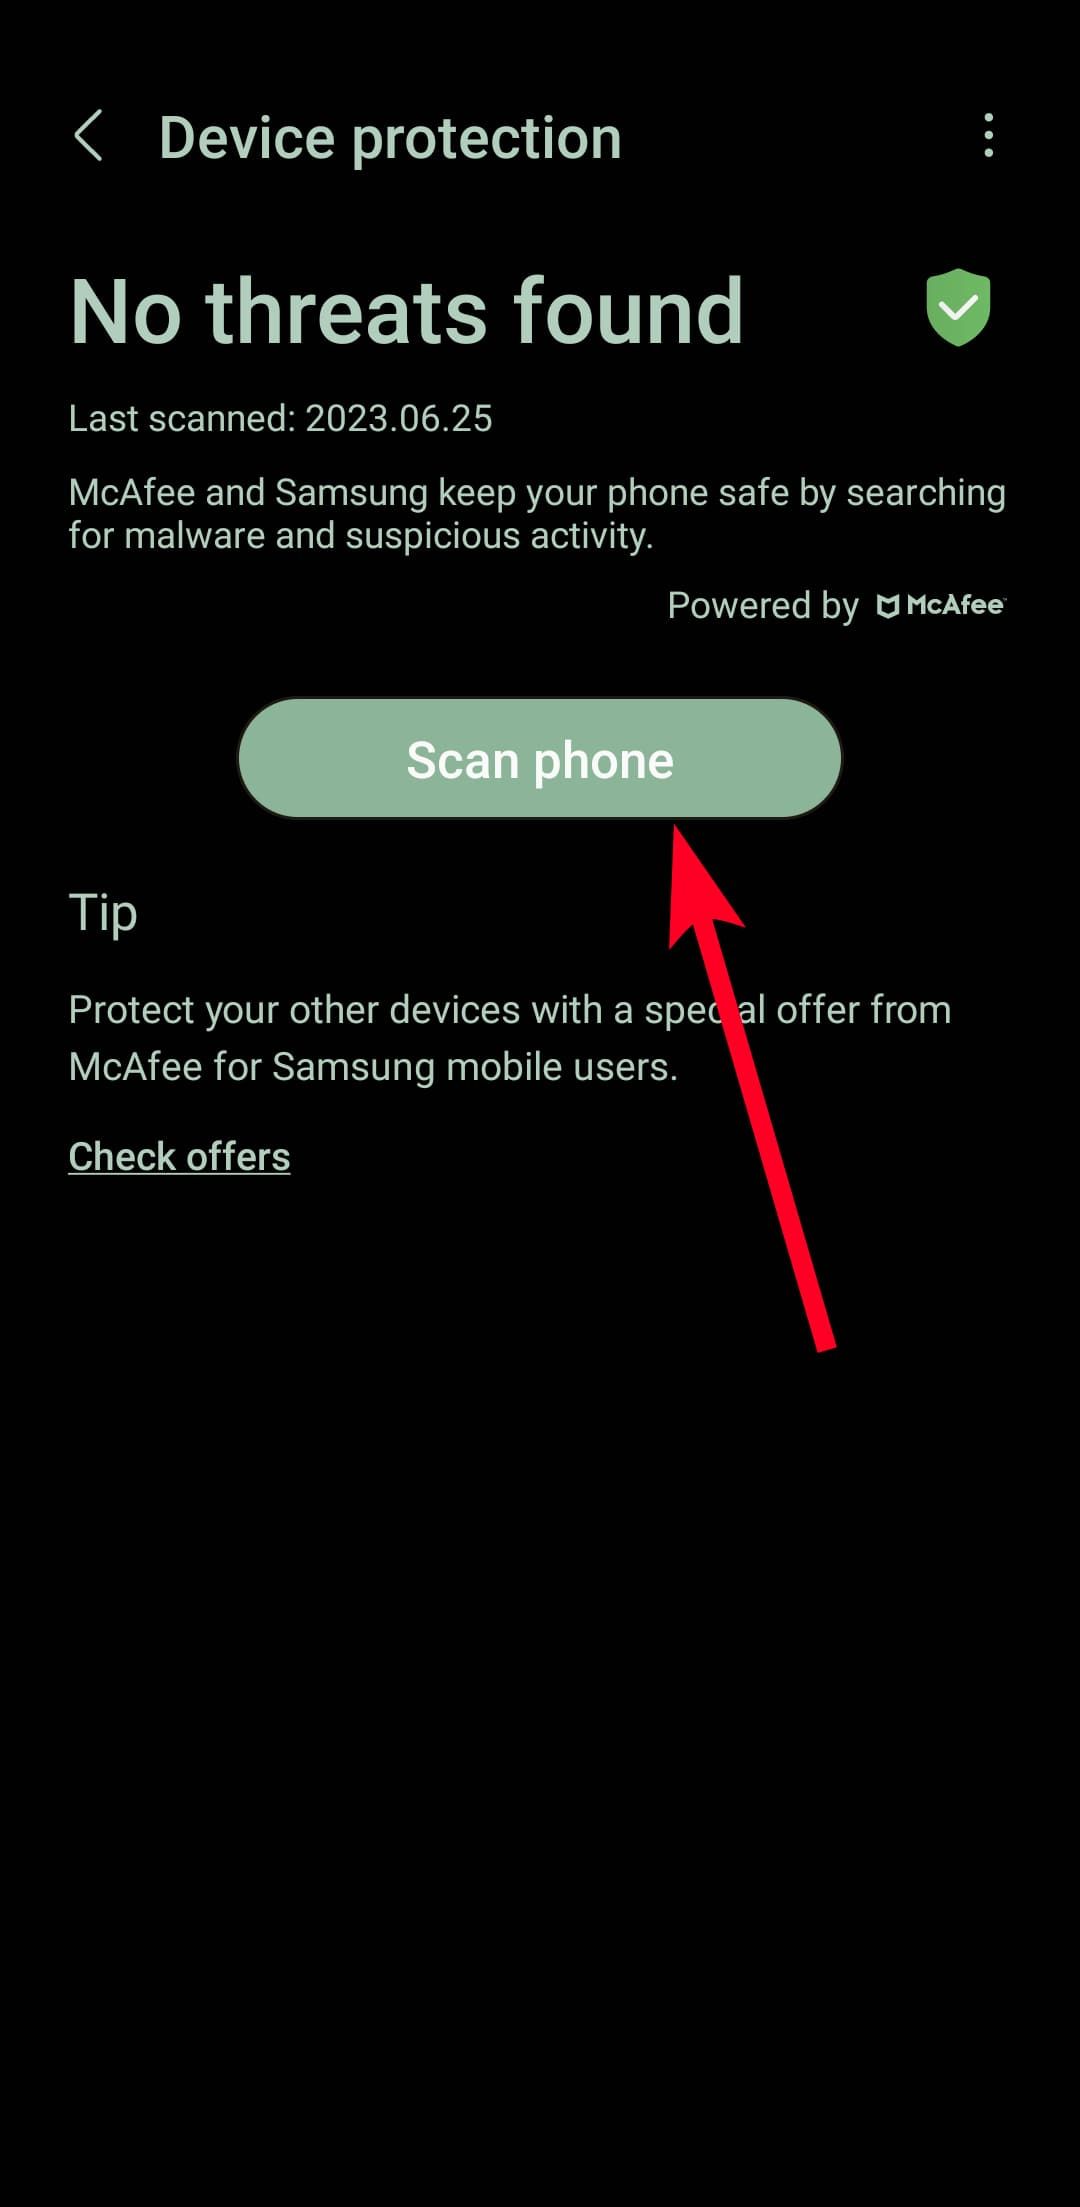 McAfee Device protection menu on Samsung Android phone